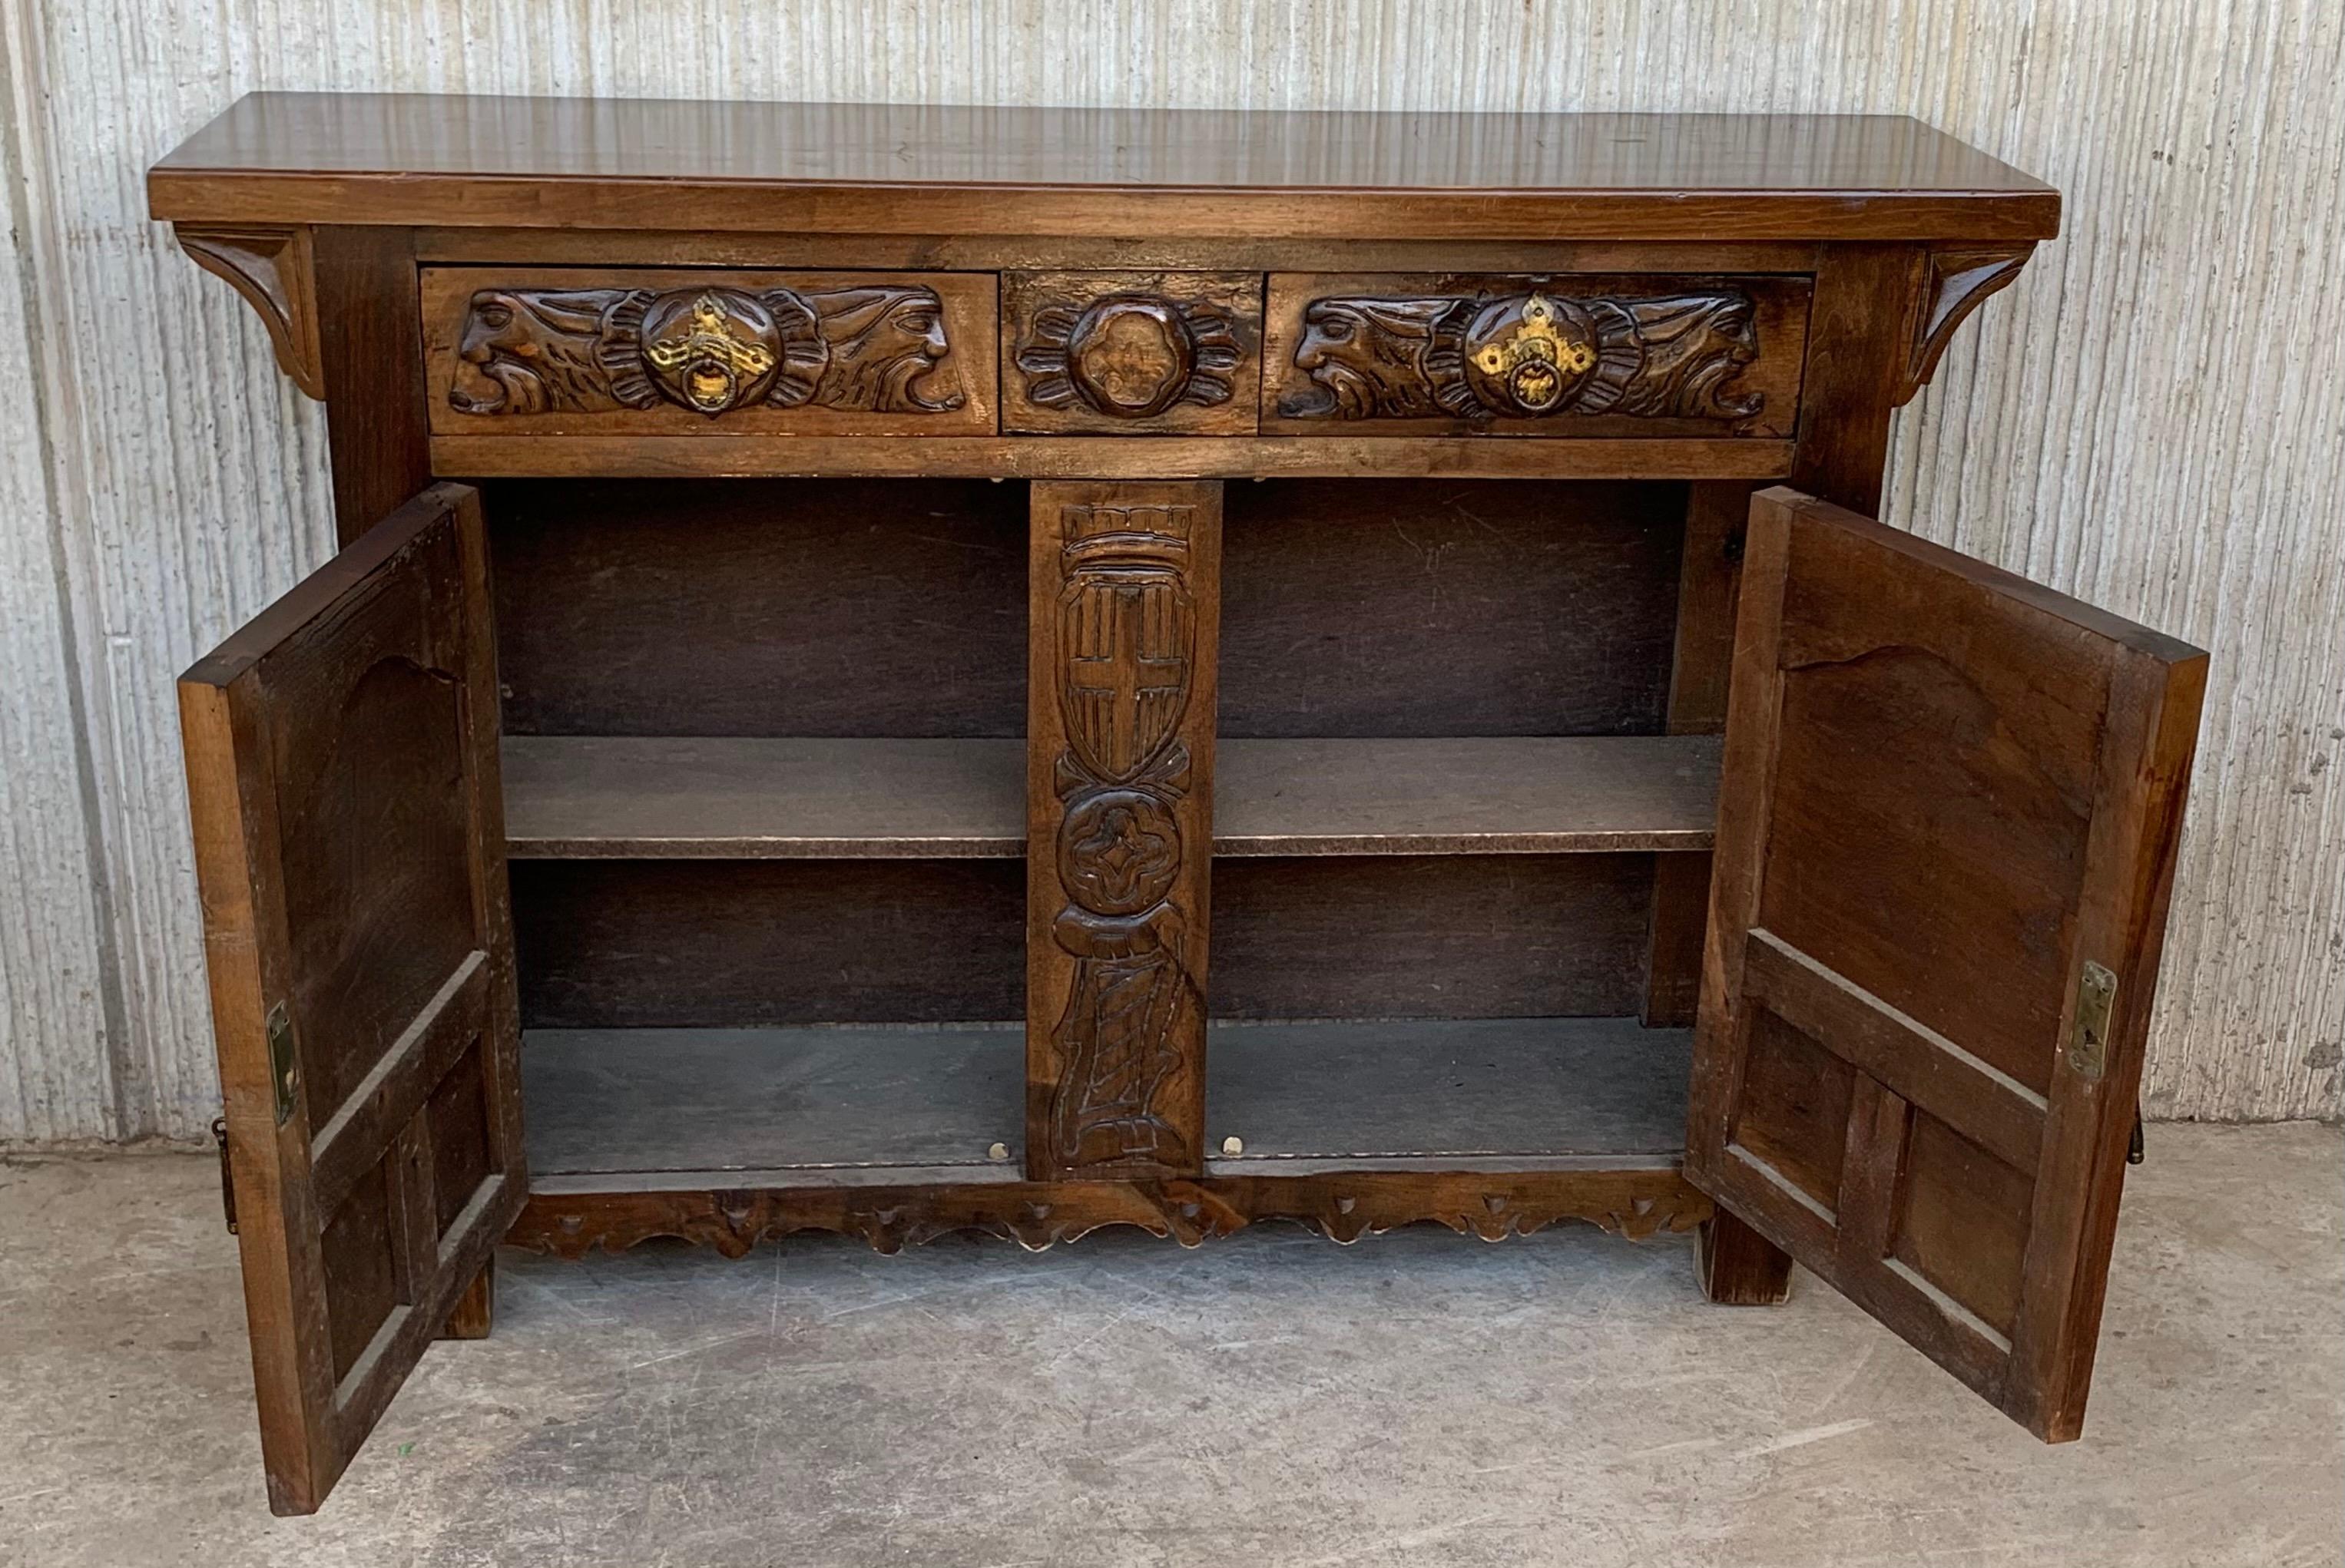 Baroque Revival 19th Catalan Spanish Hand Carved Cabinet with Two Doors and Two Drawers For Sale